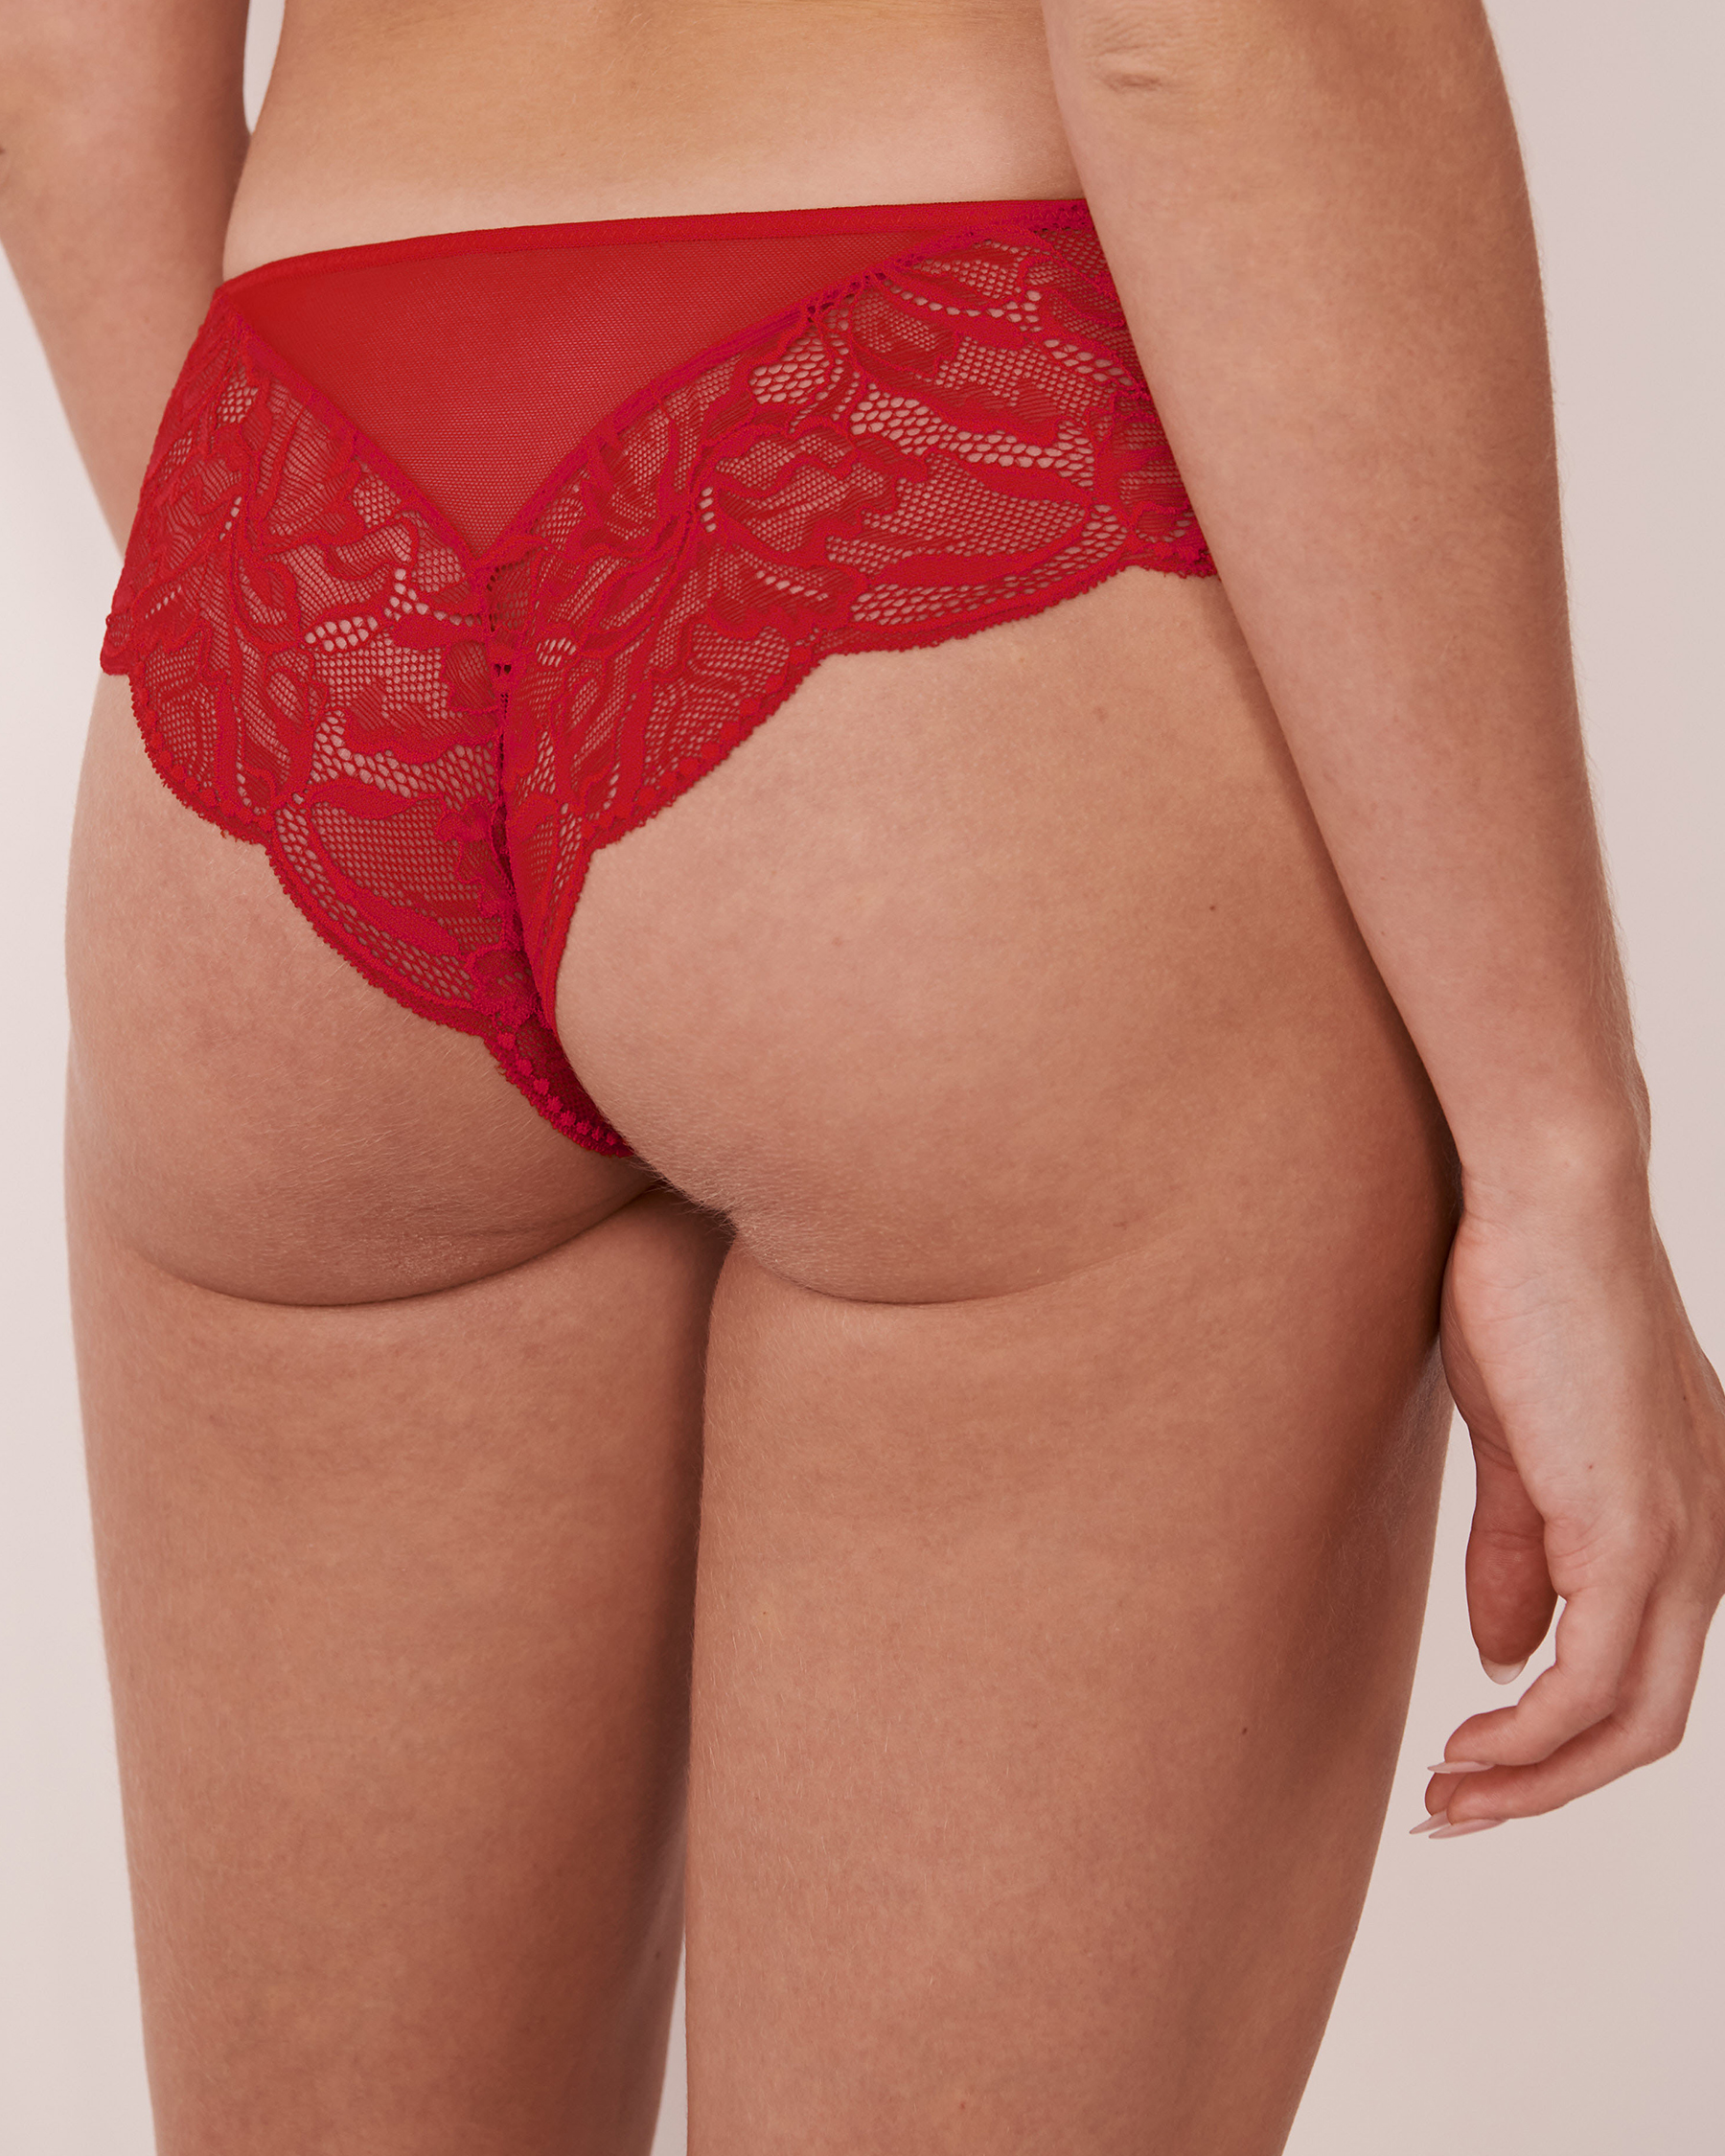 LA VIE EN ROSE Lace and Mesh Cheeky Panty Candy red 20200249 - View2